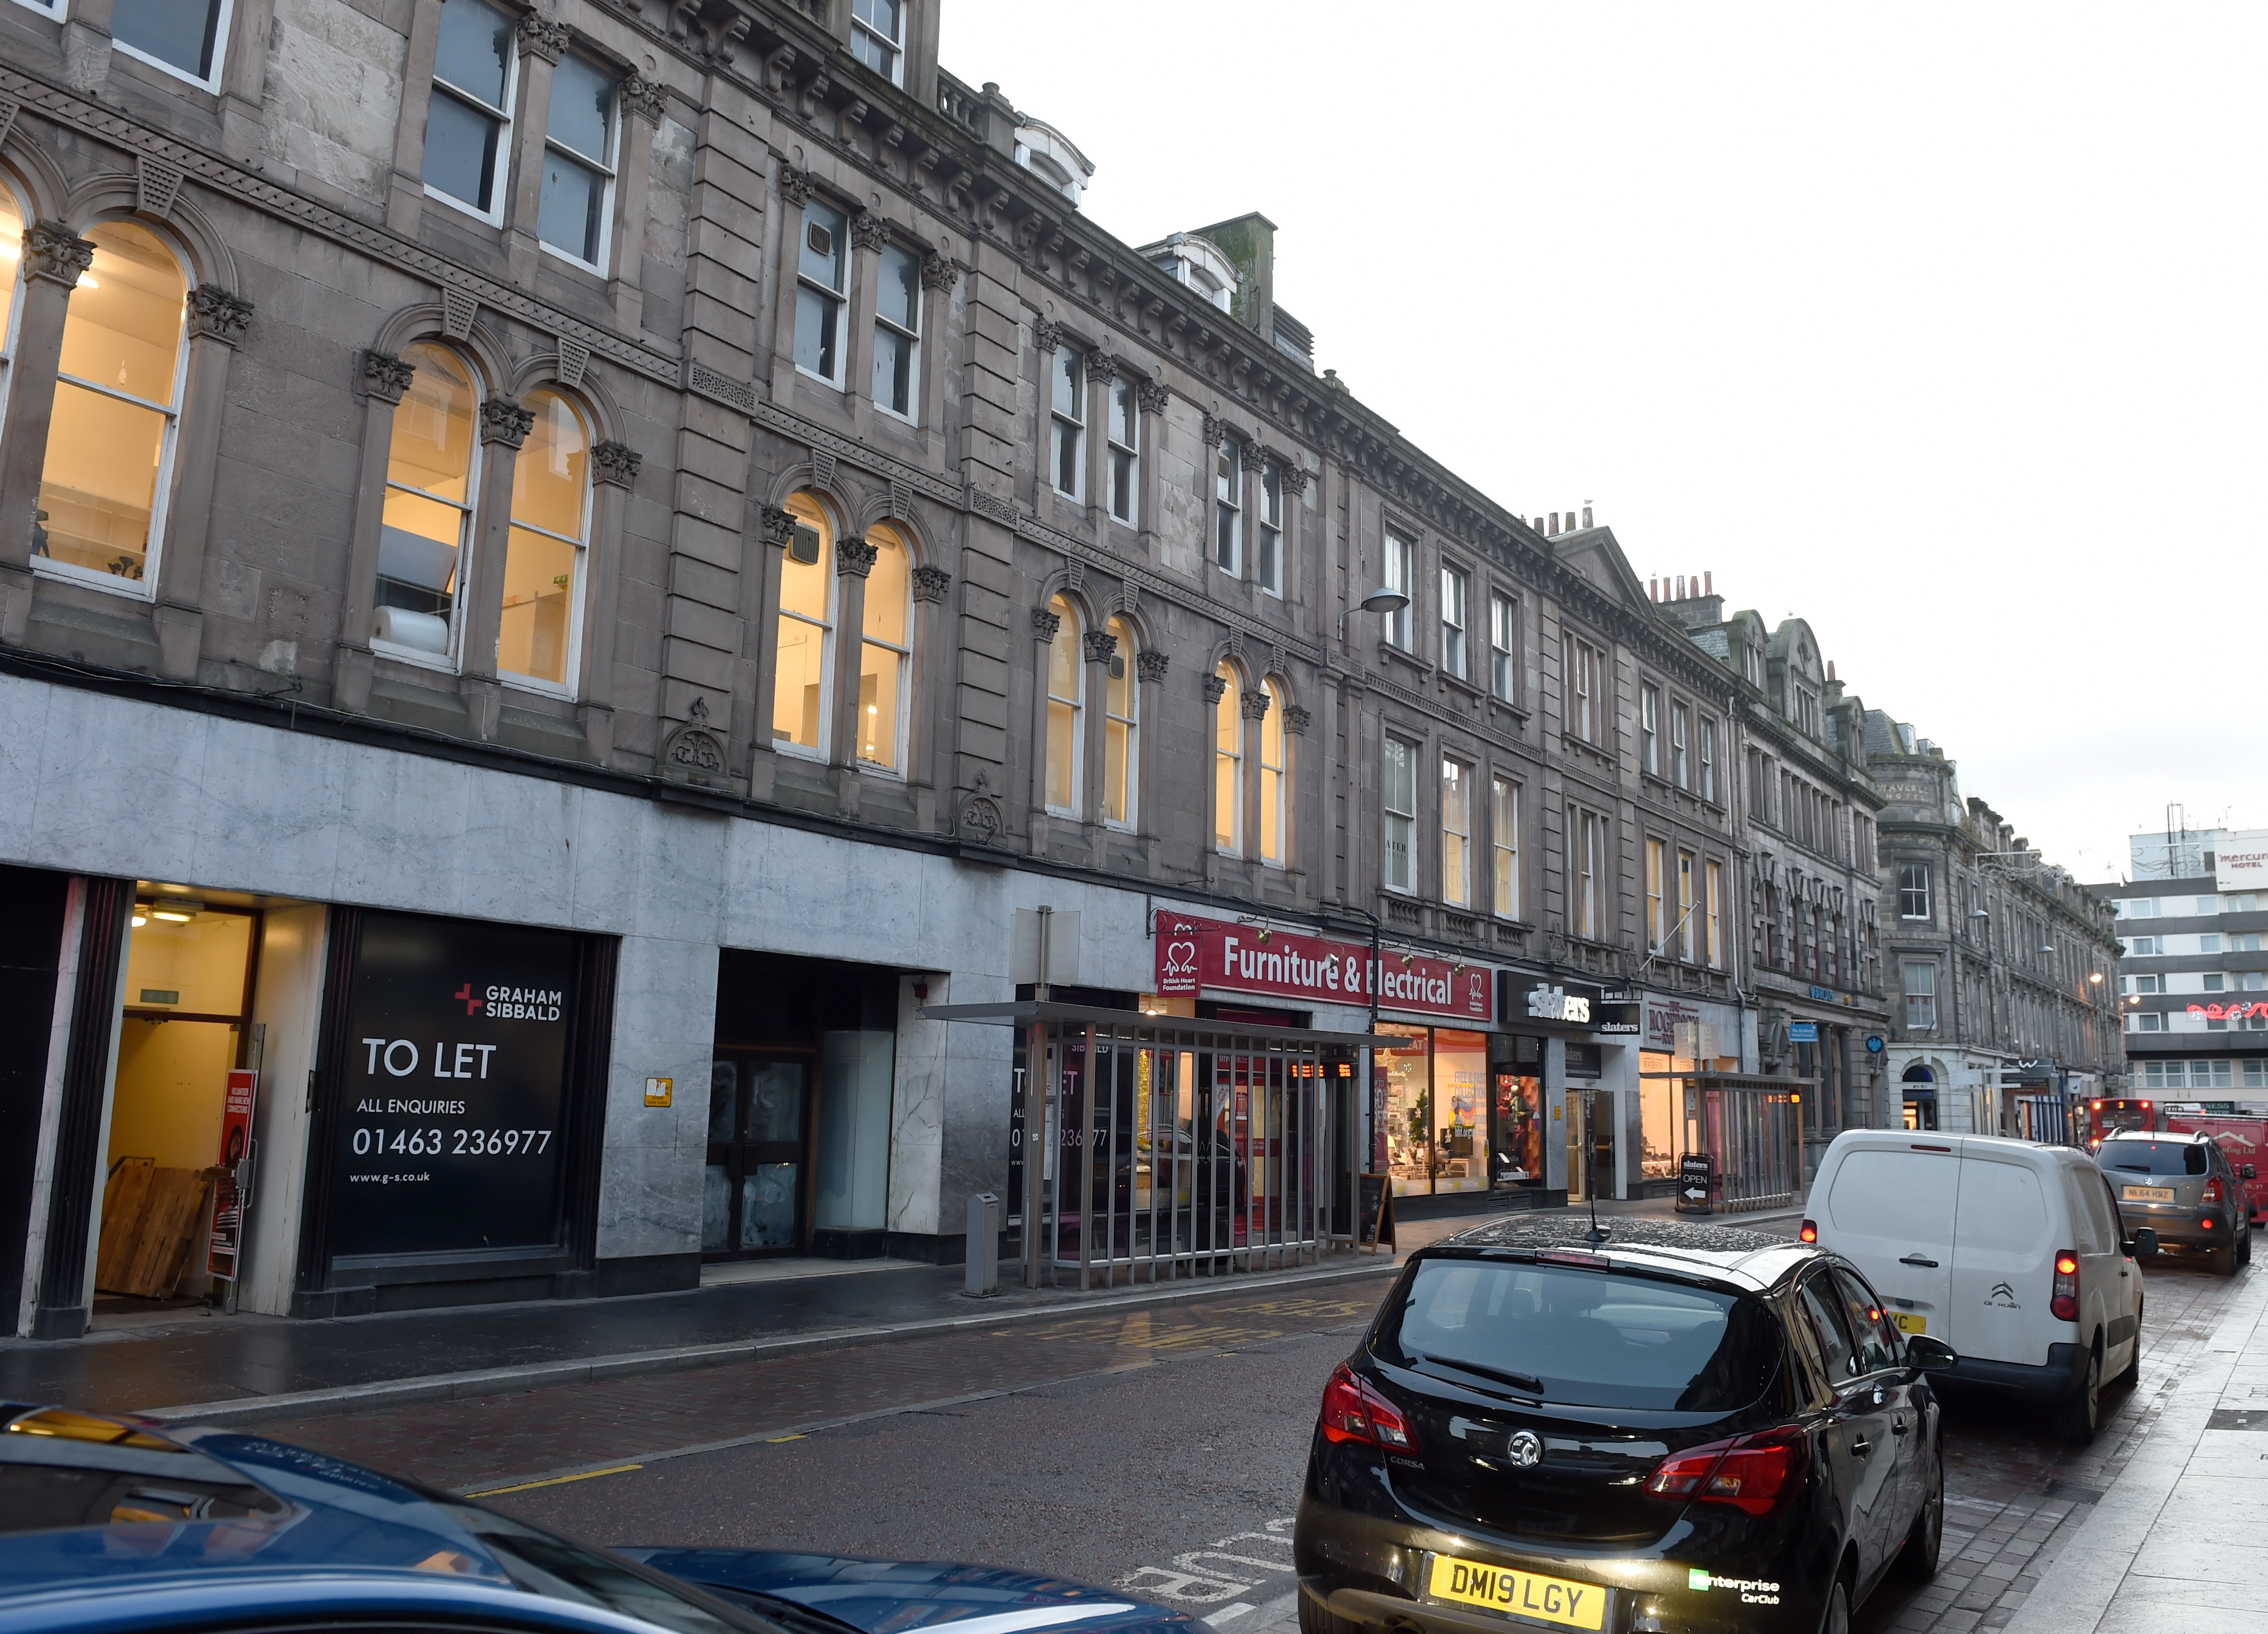 Plans are being put in place to replace the former House of Fraser store on Union Street, Inverness with flats and retail units.